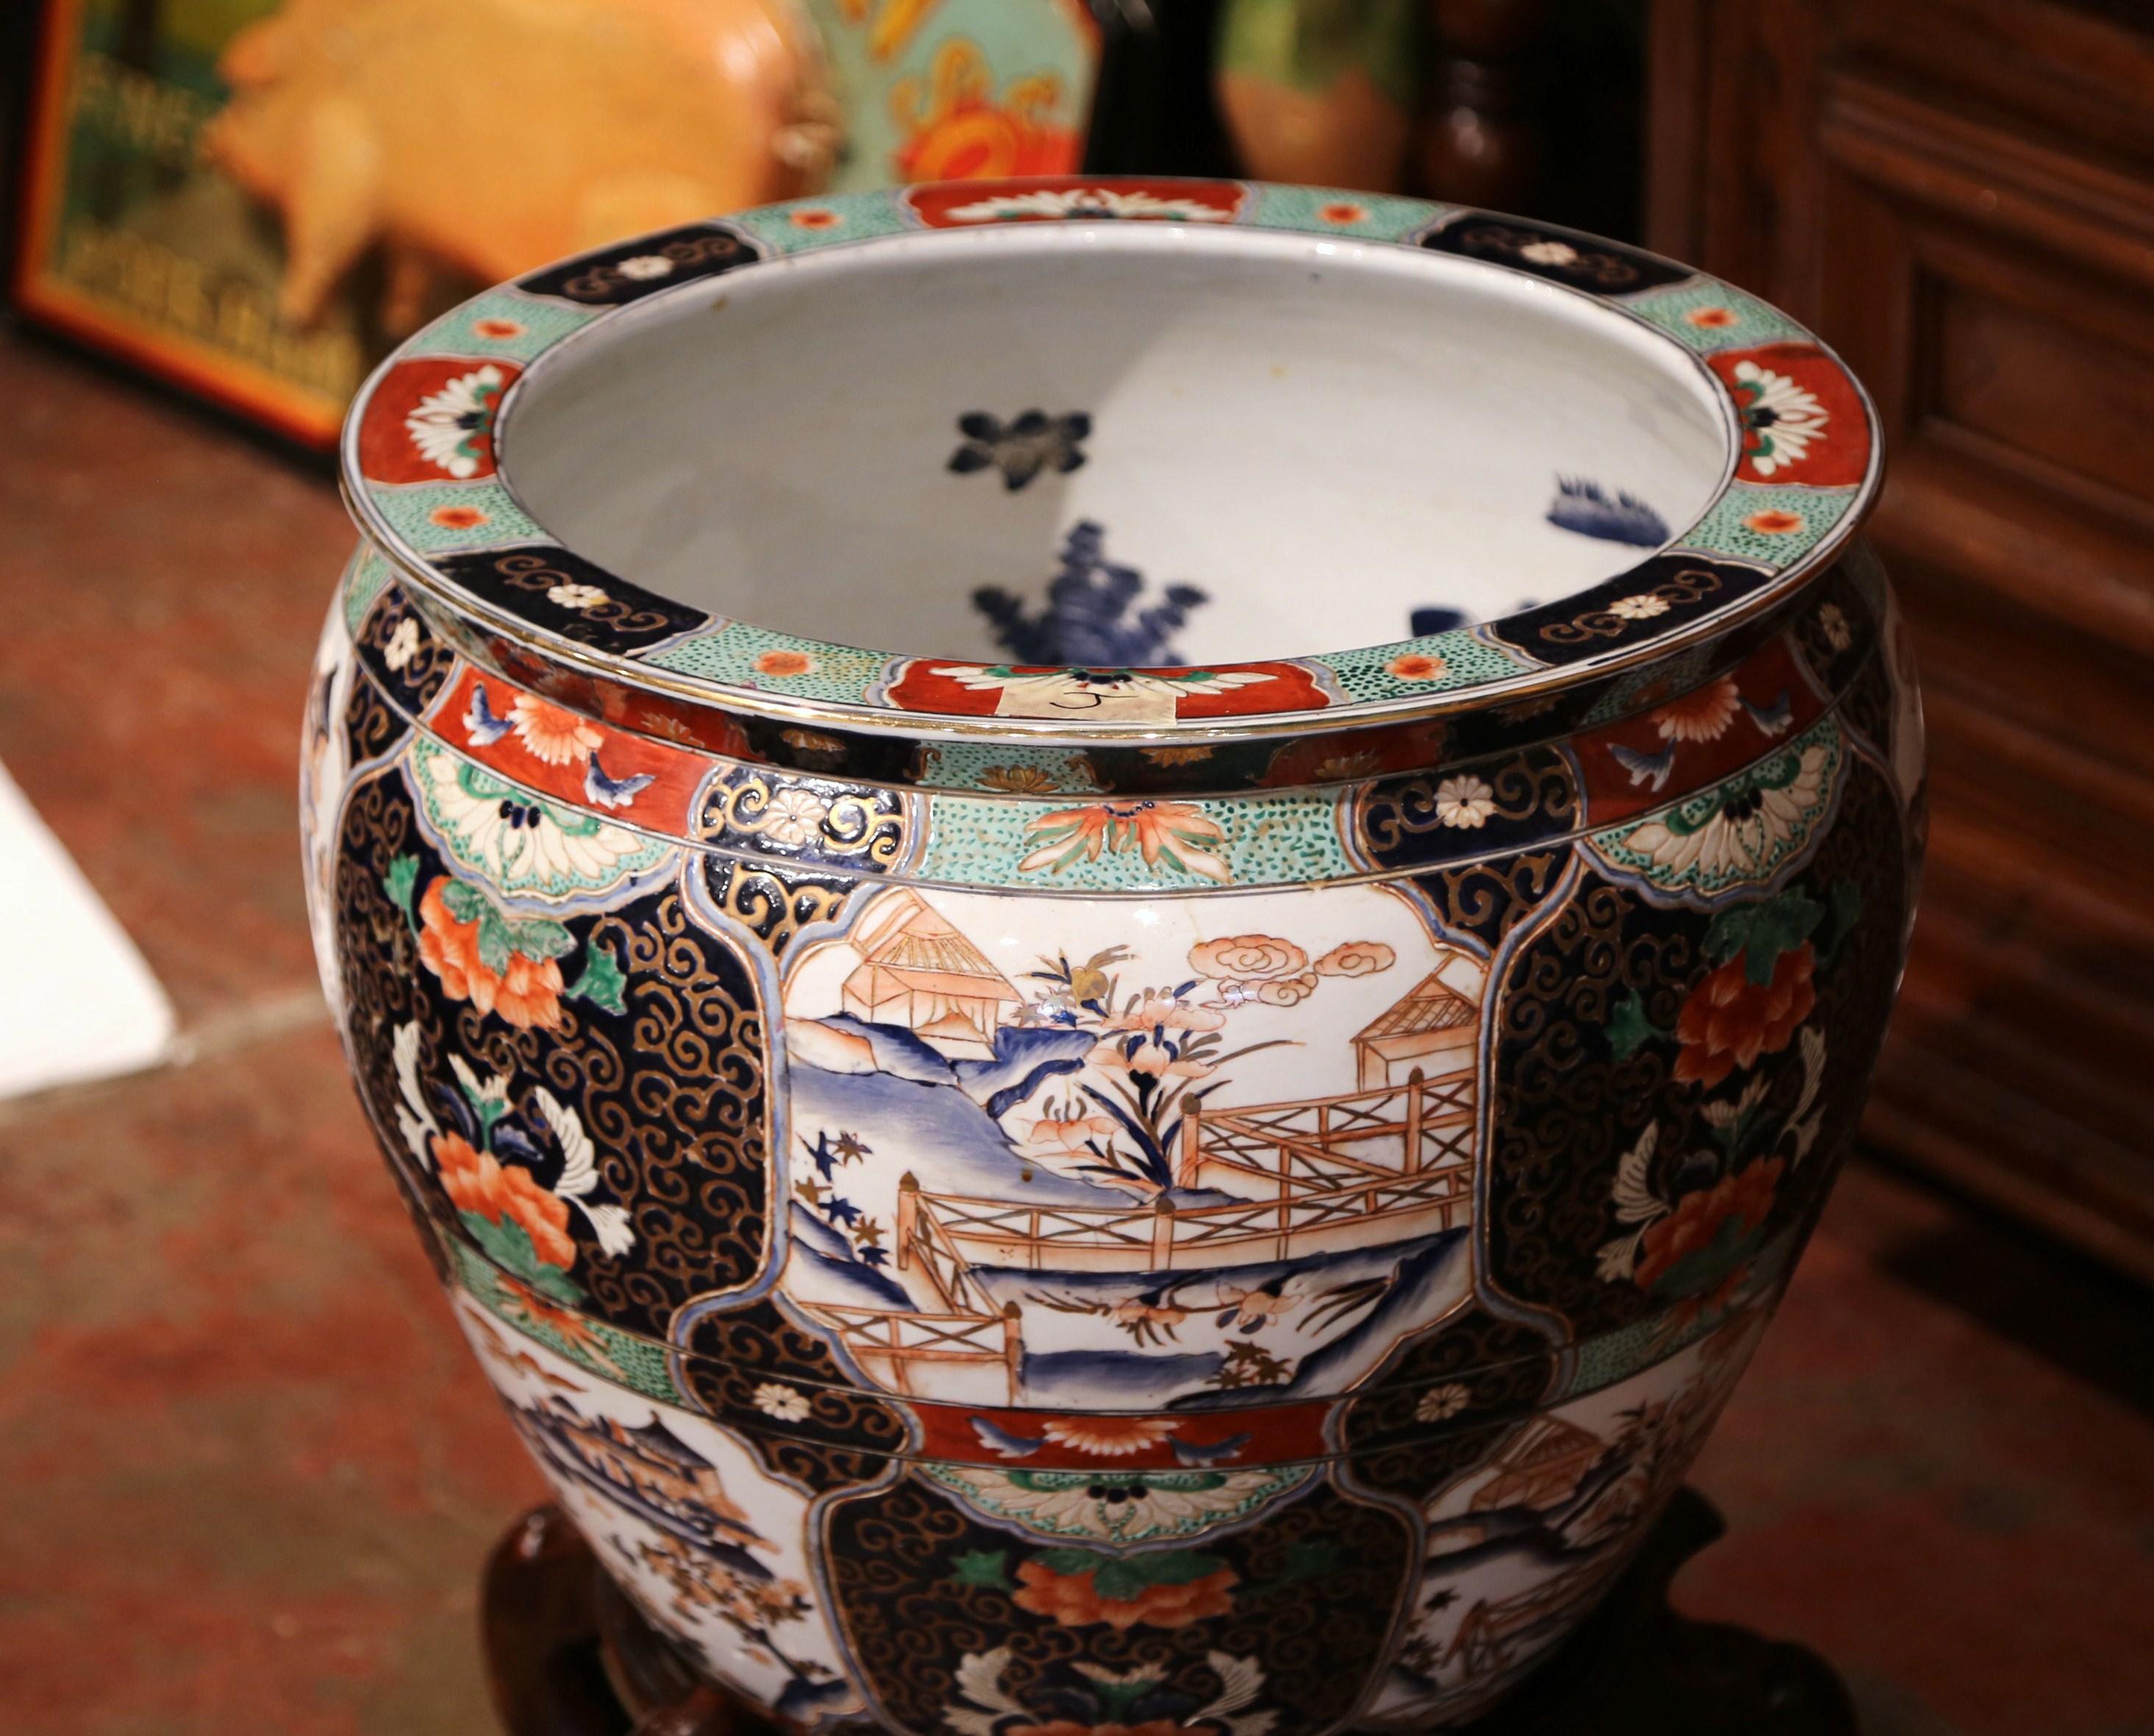 Hand-Crafted Chinese Porcelain Fish Bowl on Wood Stand with Avian and Botanical Motifs